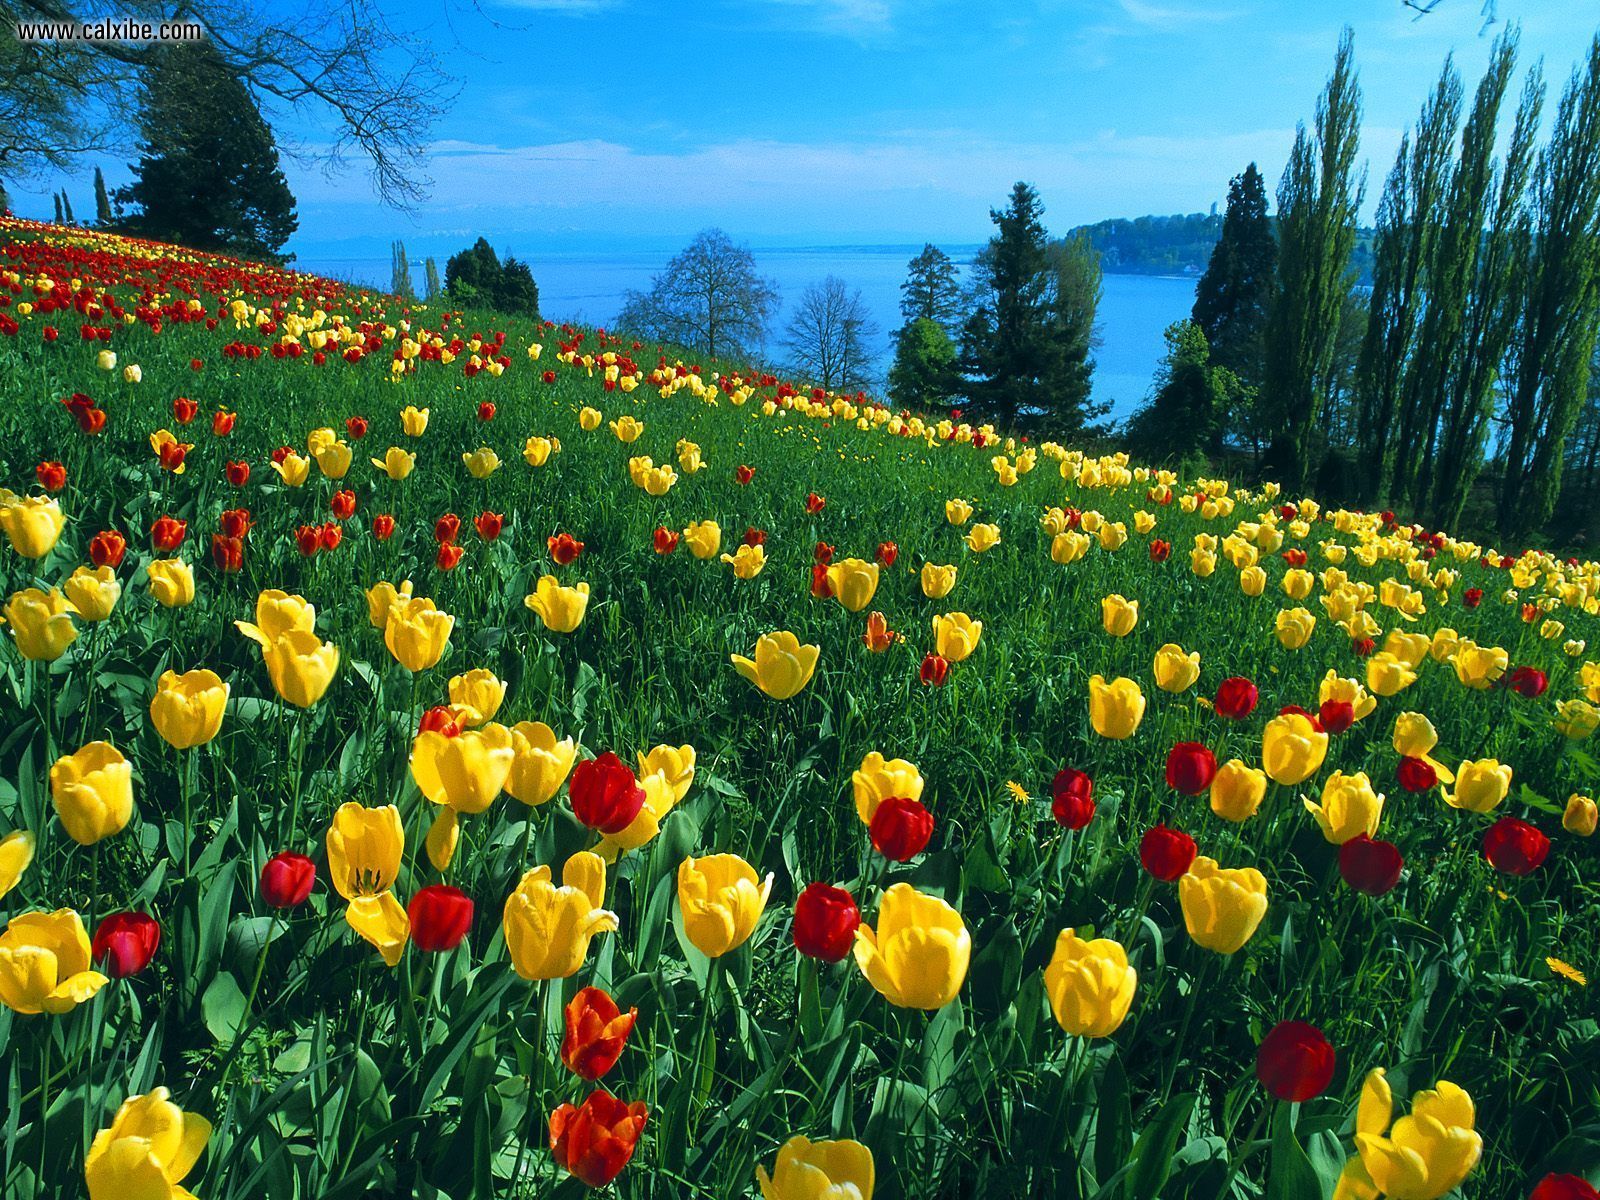 Nature: Field Of Tulips Island Of Mainau Germany, picture nr. 16259